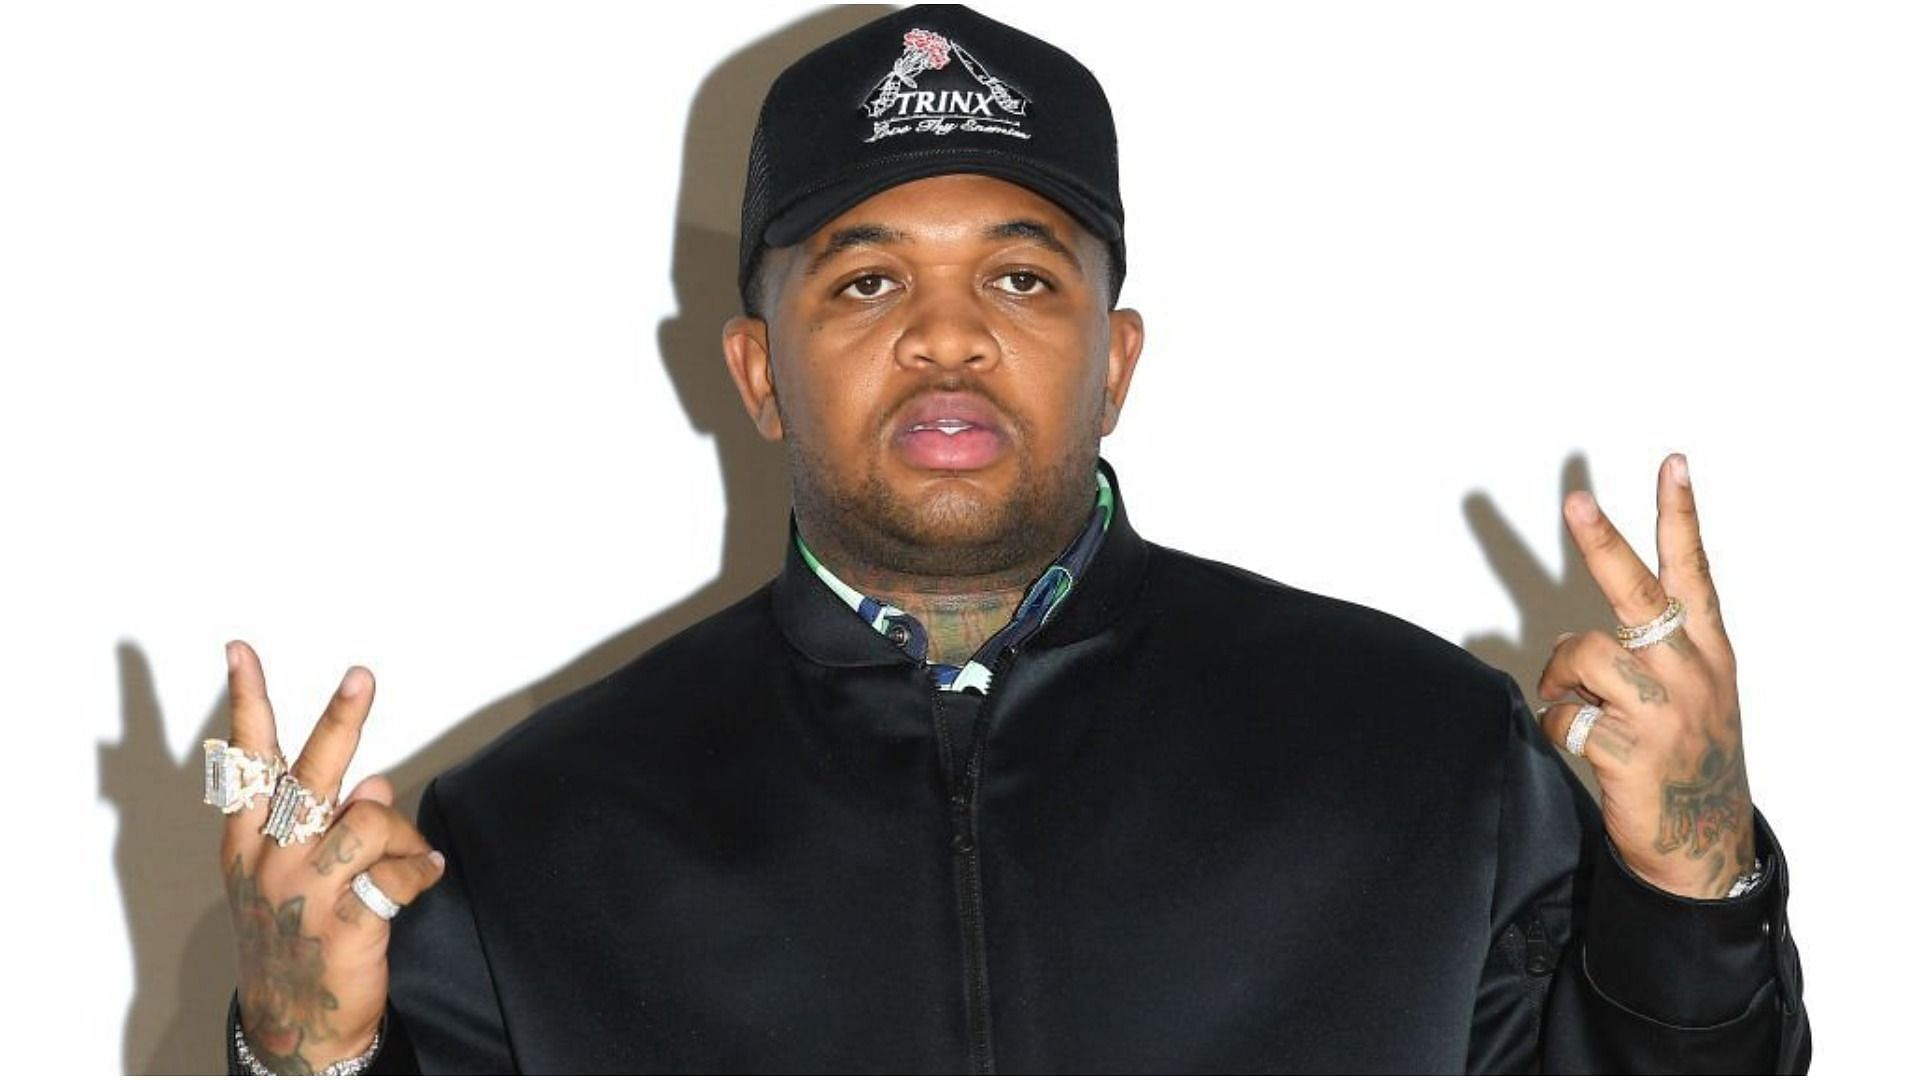 DJ Mustard was involved in a car accident in January 2022 (Image via Pascal Le Segretain/Getty Images)